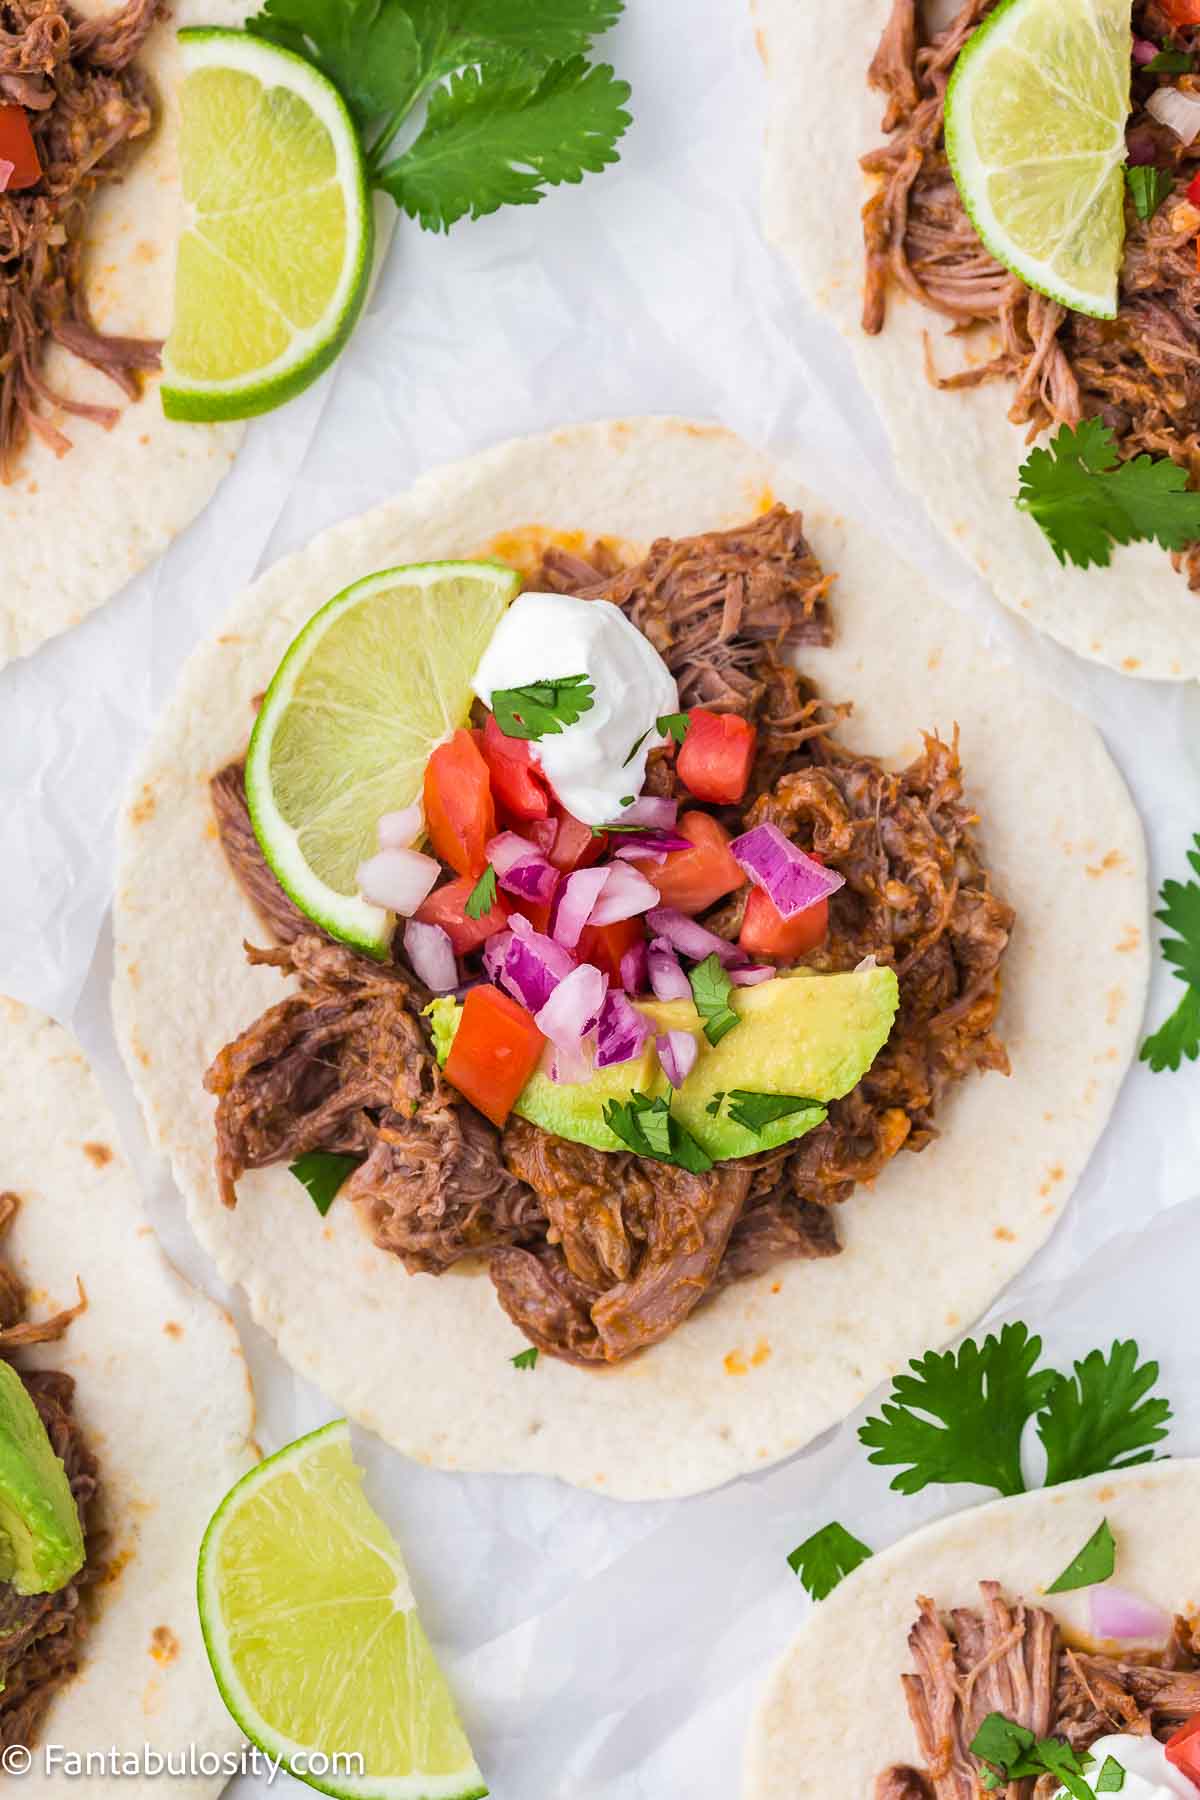 Slow cooker beef taco on tortilla with toppings.